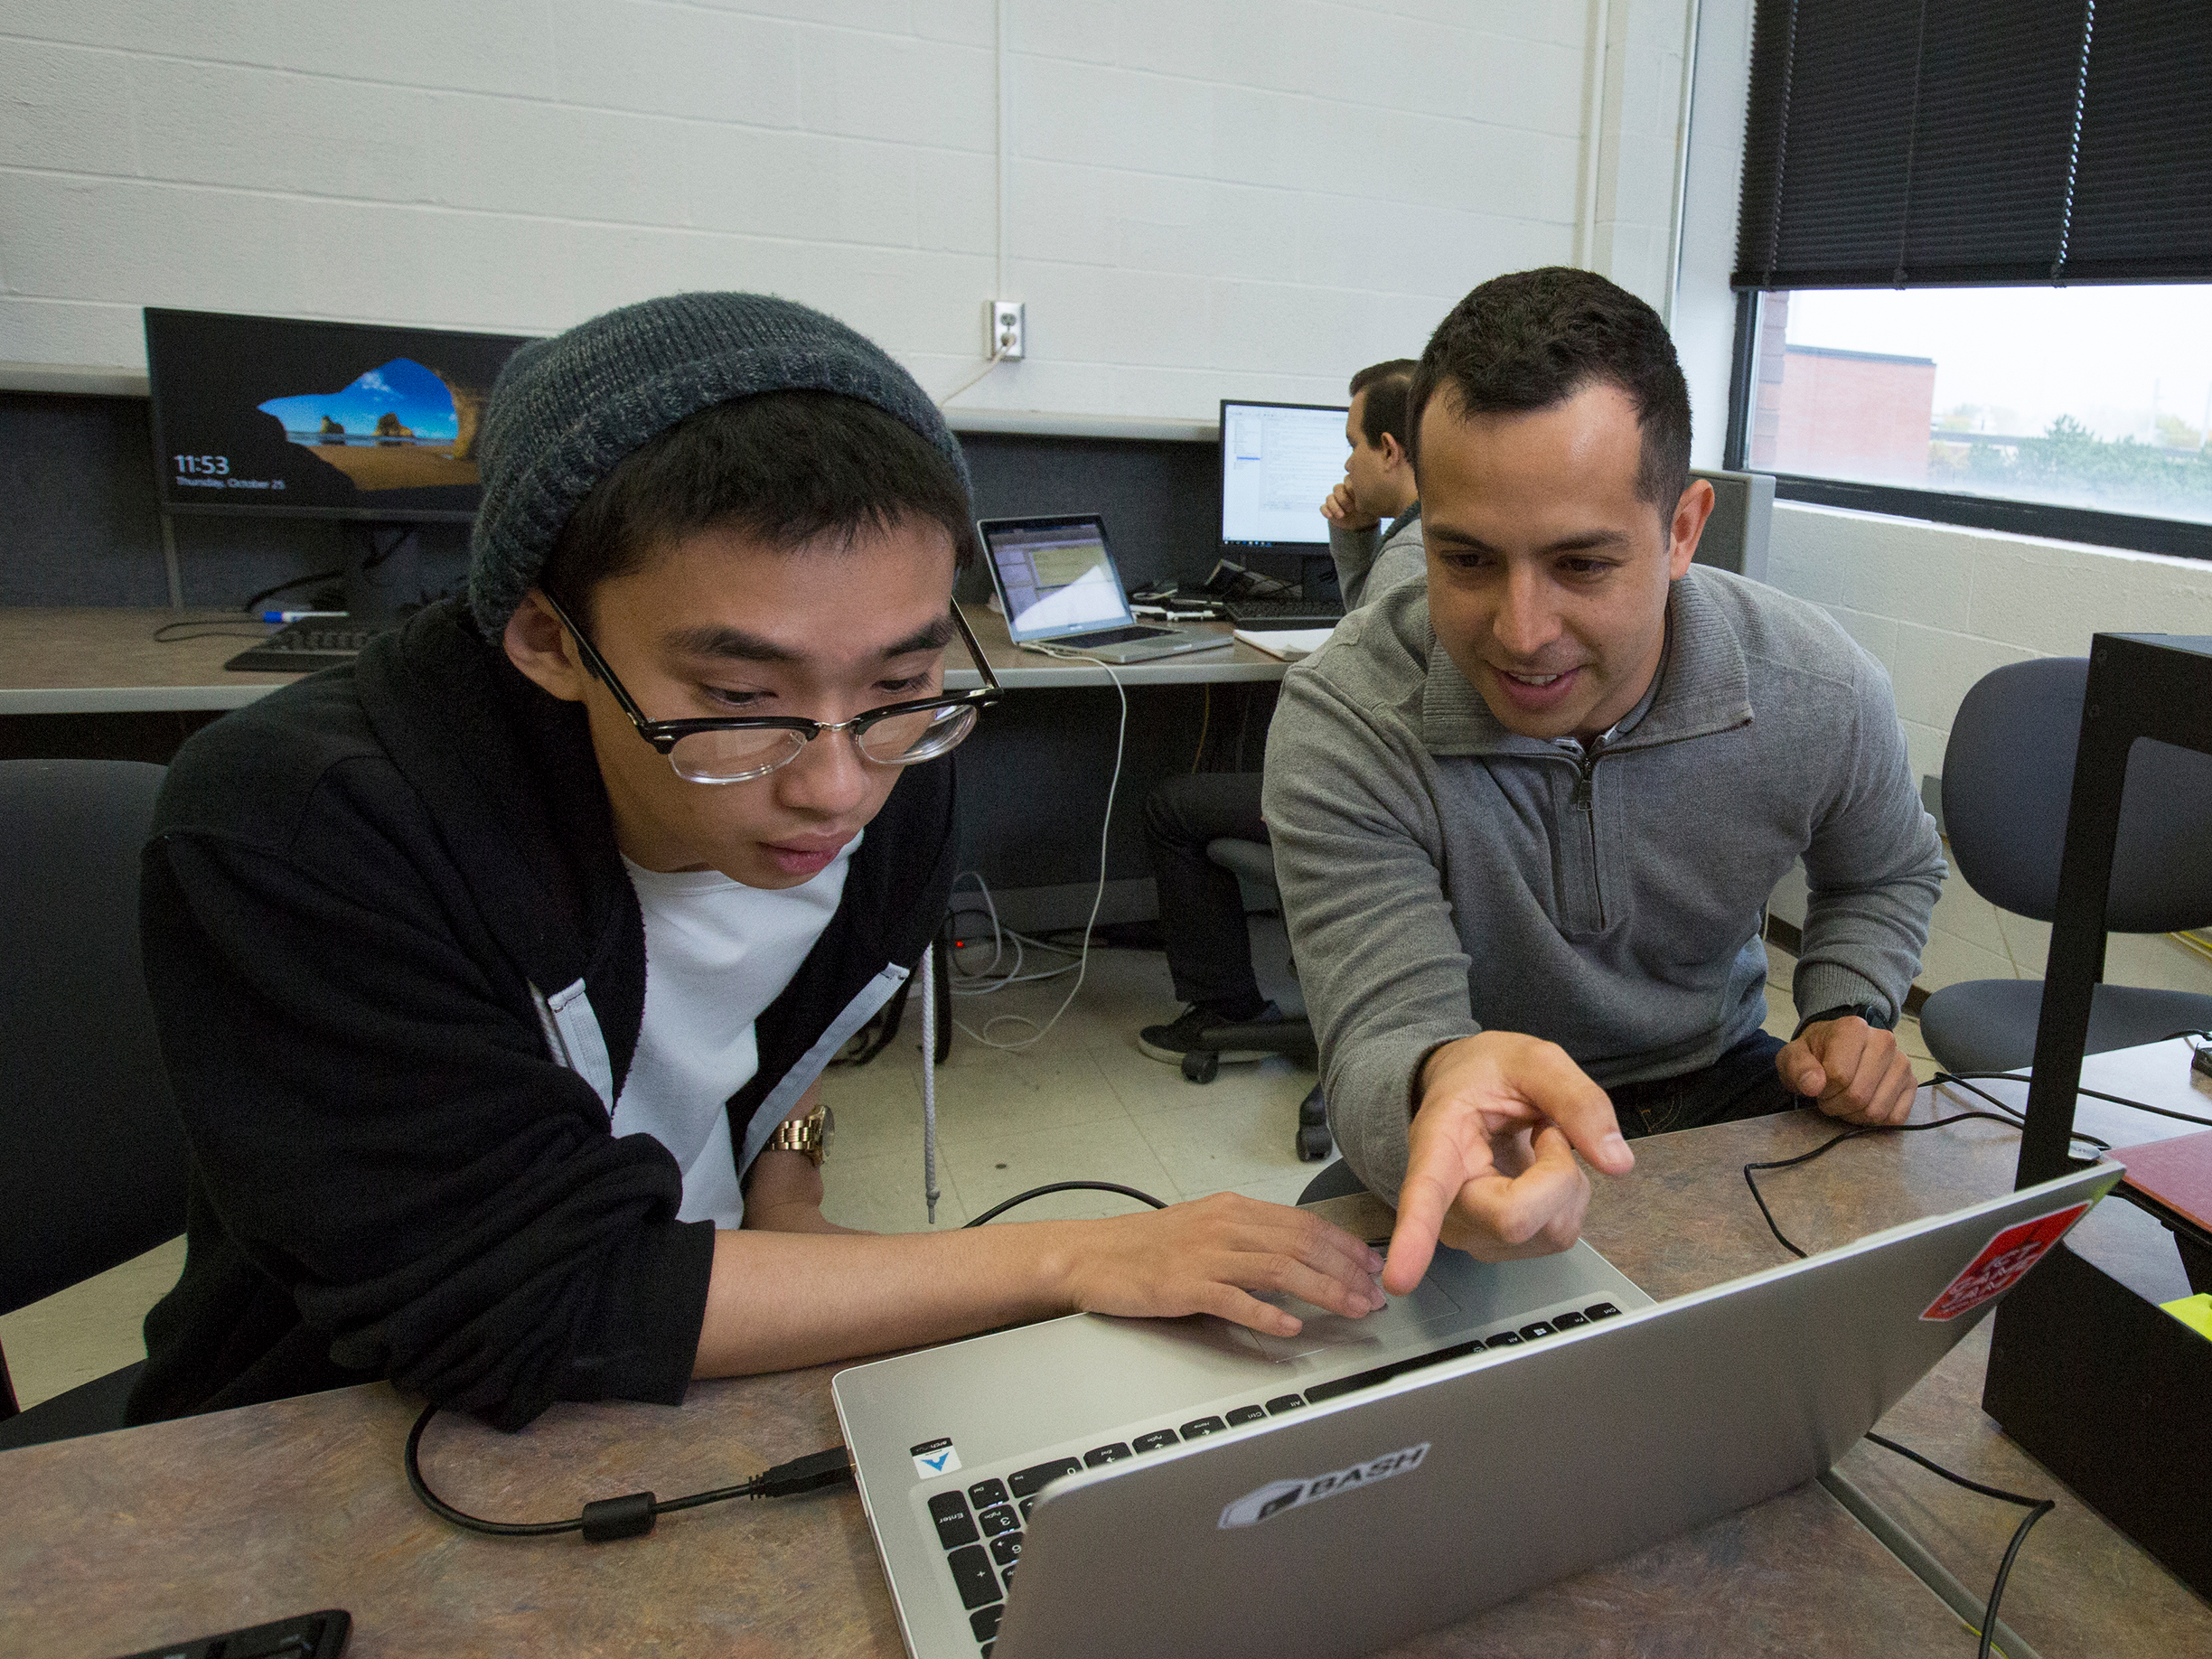 Students working together on a computer